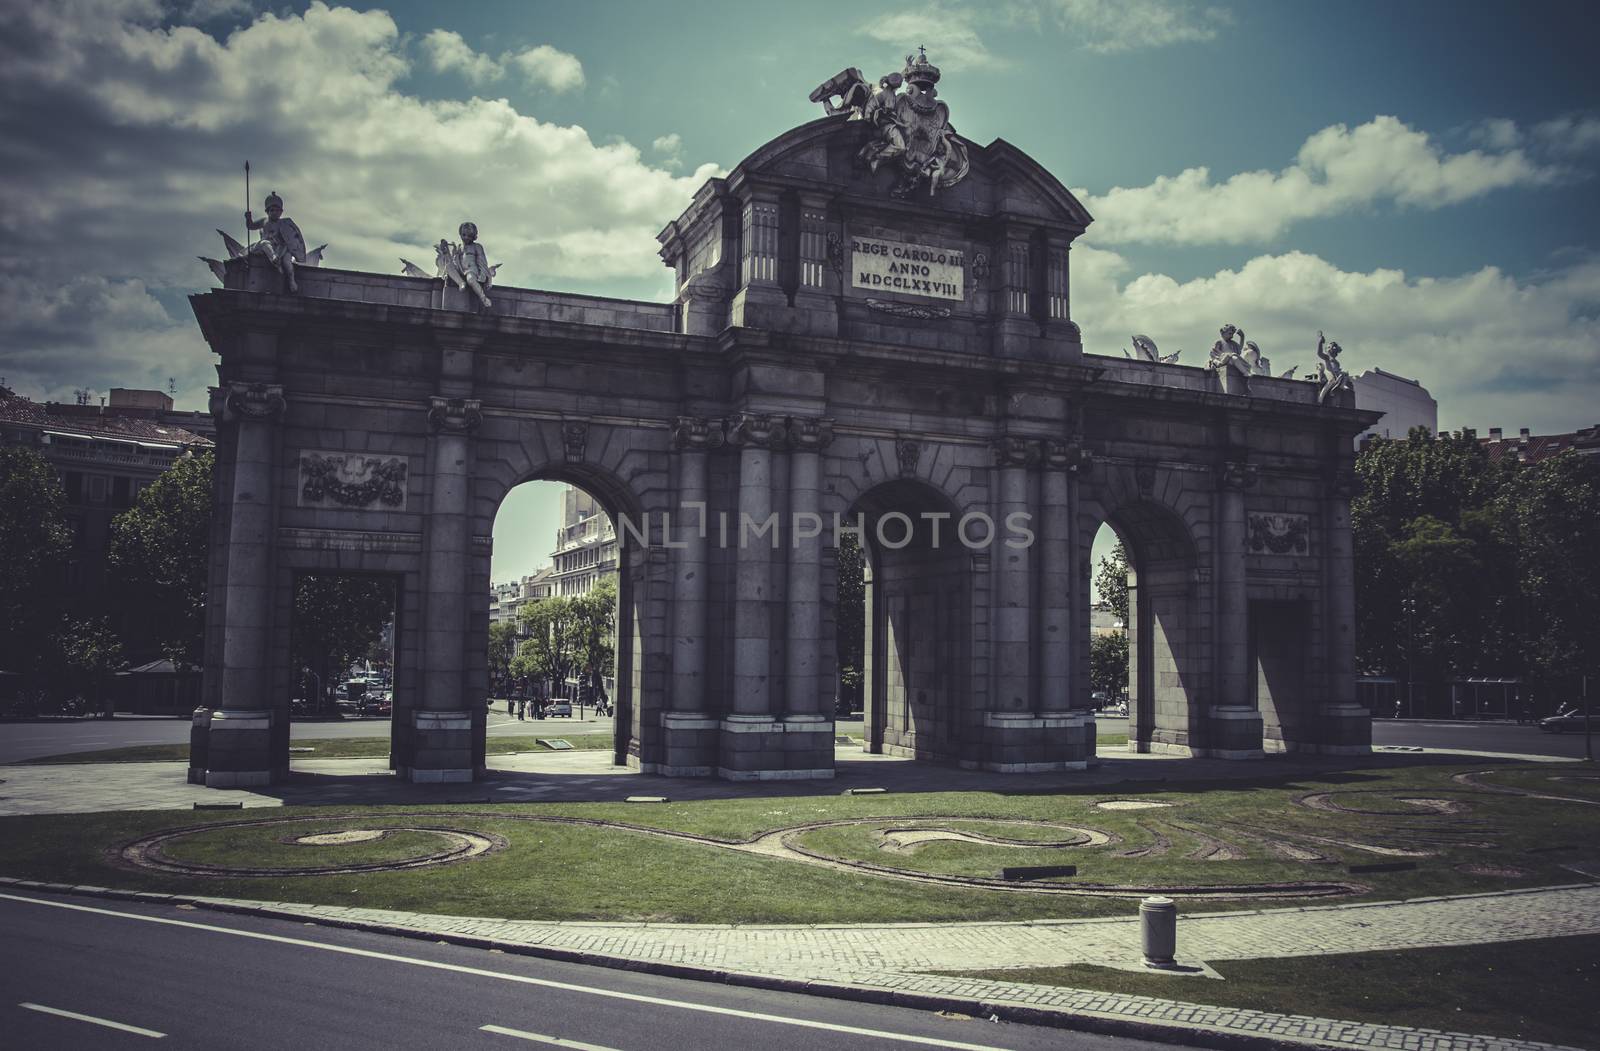 Puerta de Alcal��, Image of the city of Madrid, its characterist by FernandoCortes